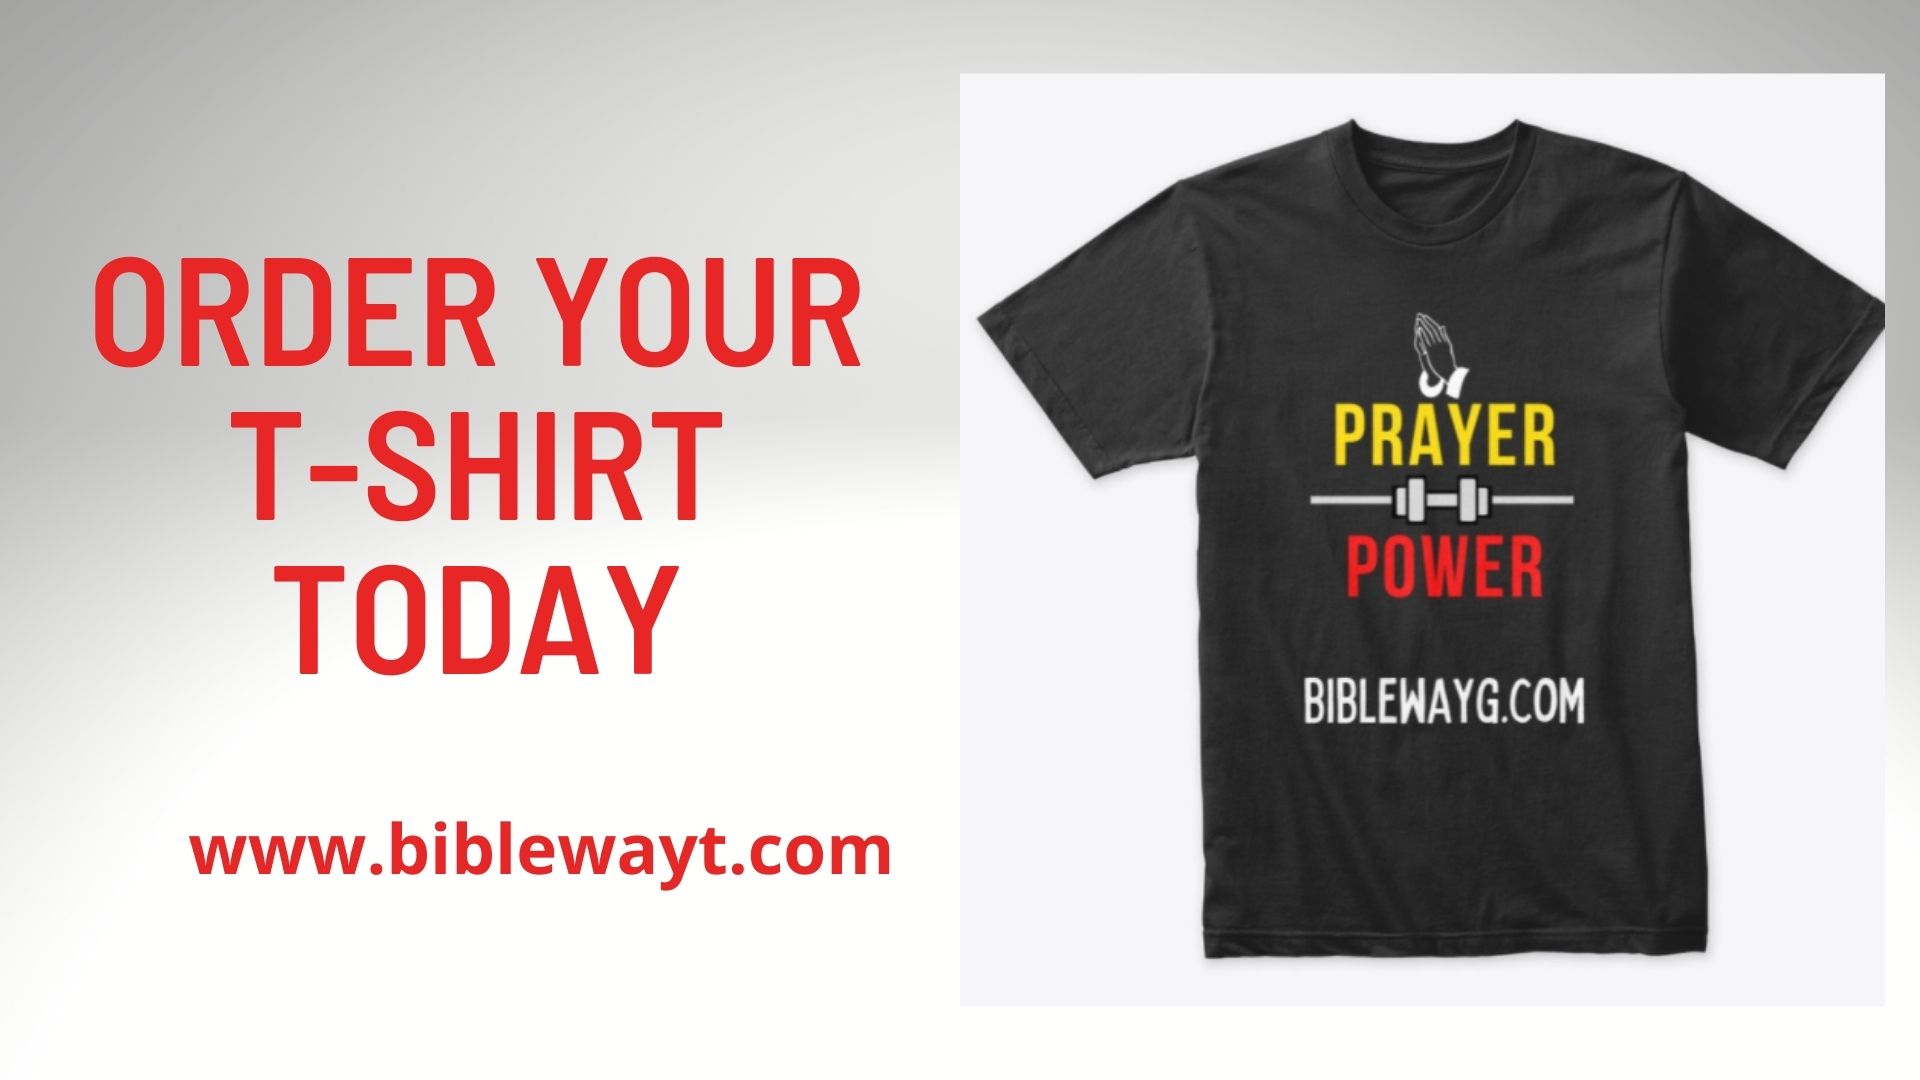 Prayer Power T-Shirts Available